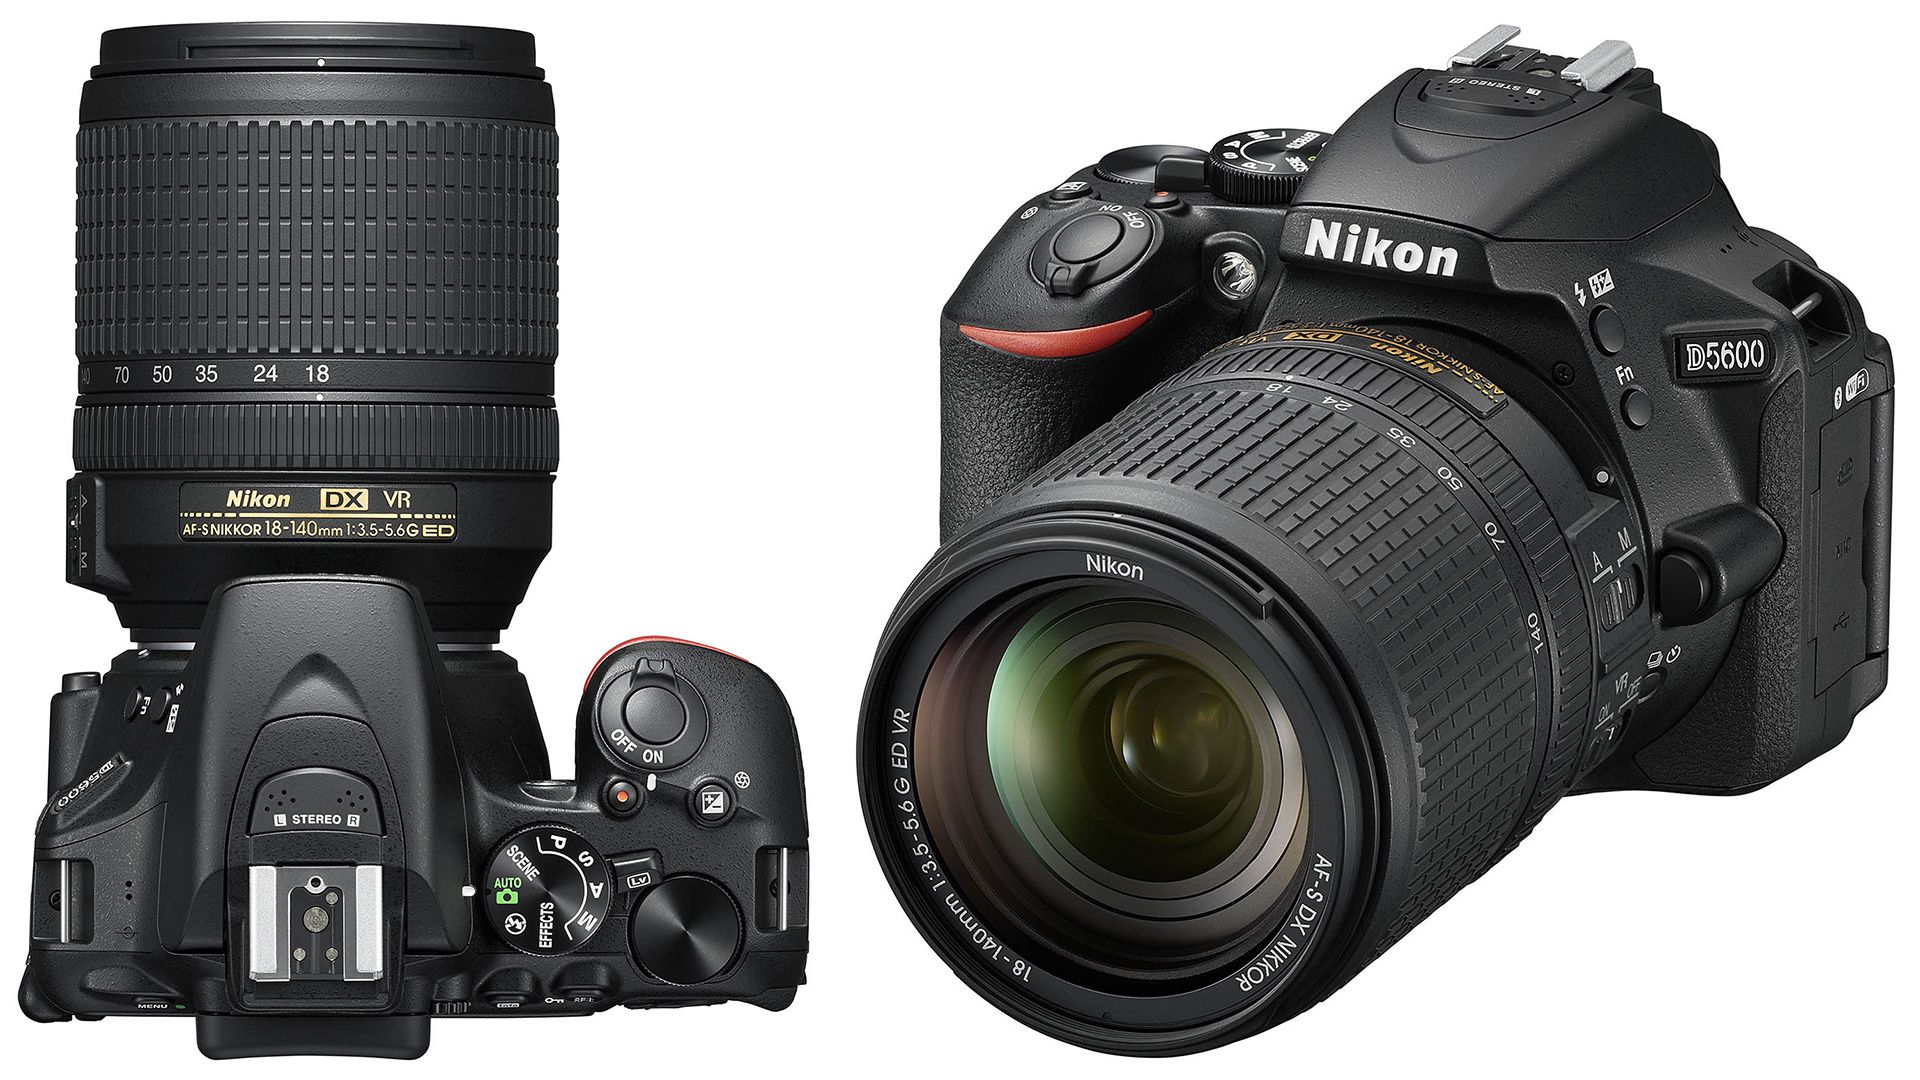 Japan's Top Selling DSLR In 2020 Was The Nikon D5600, What?